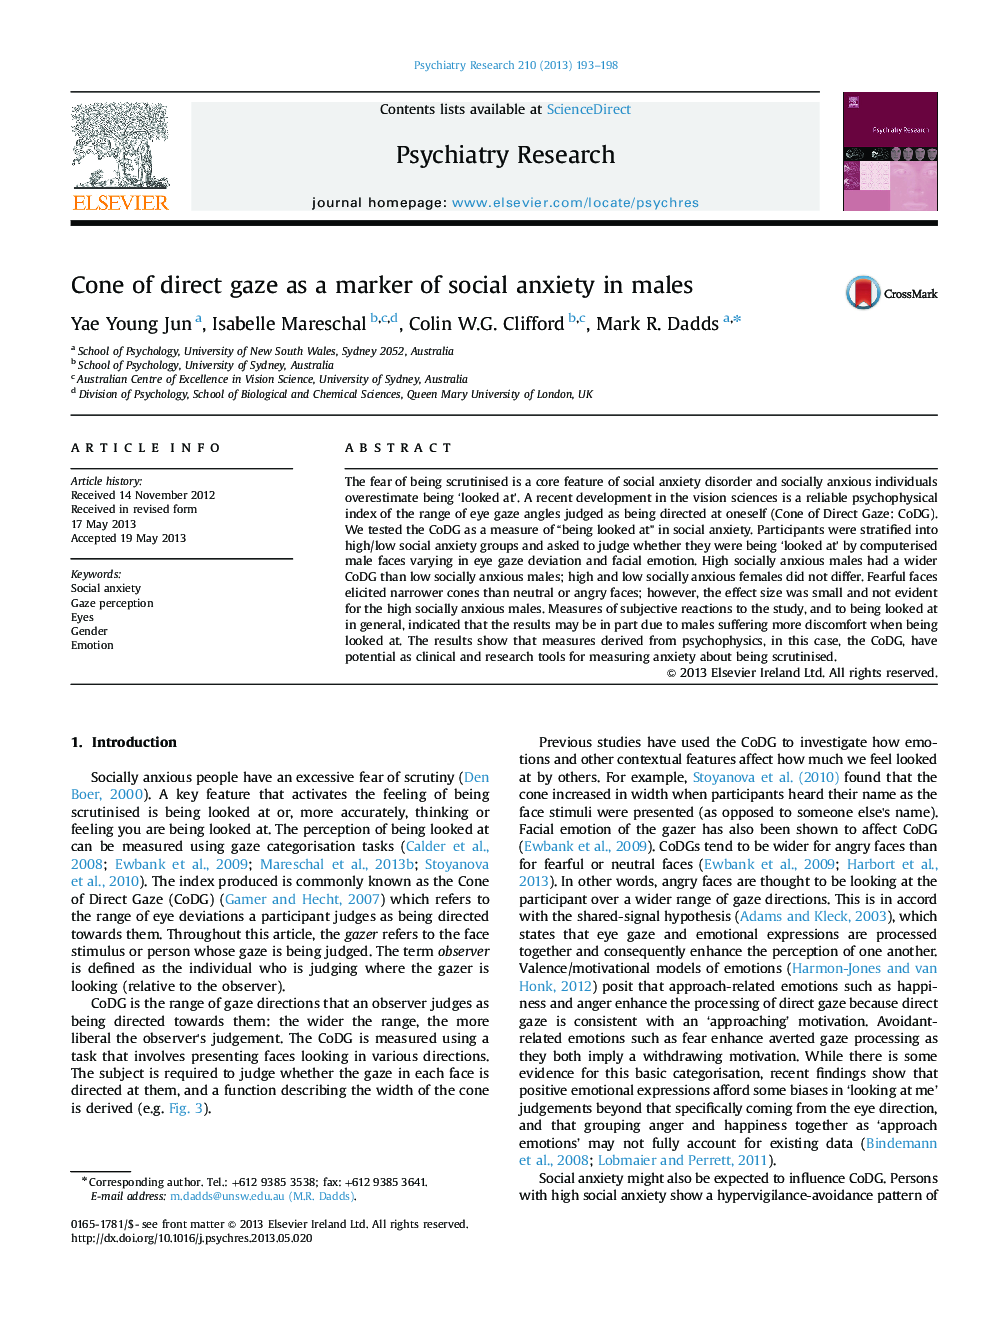 Cone of direct gaze as a marker of social anxiety in males